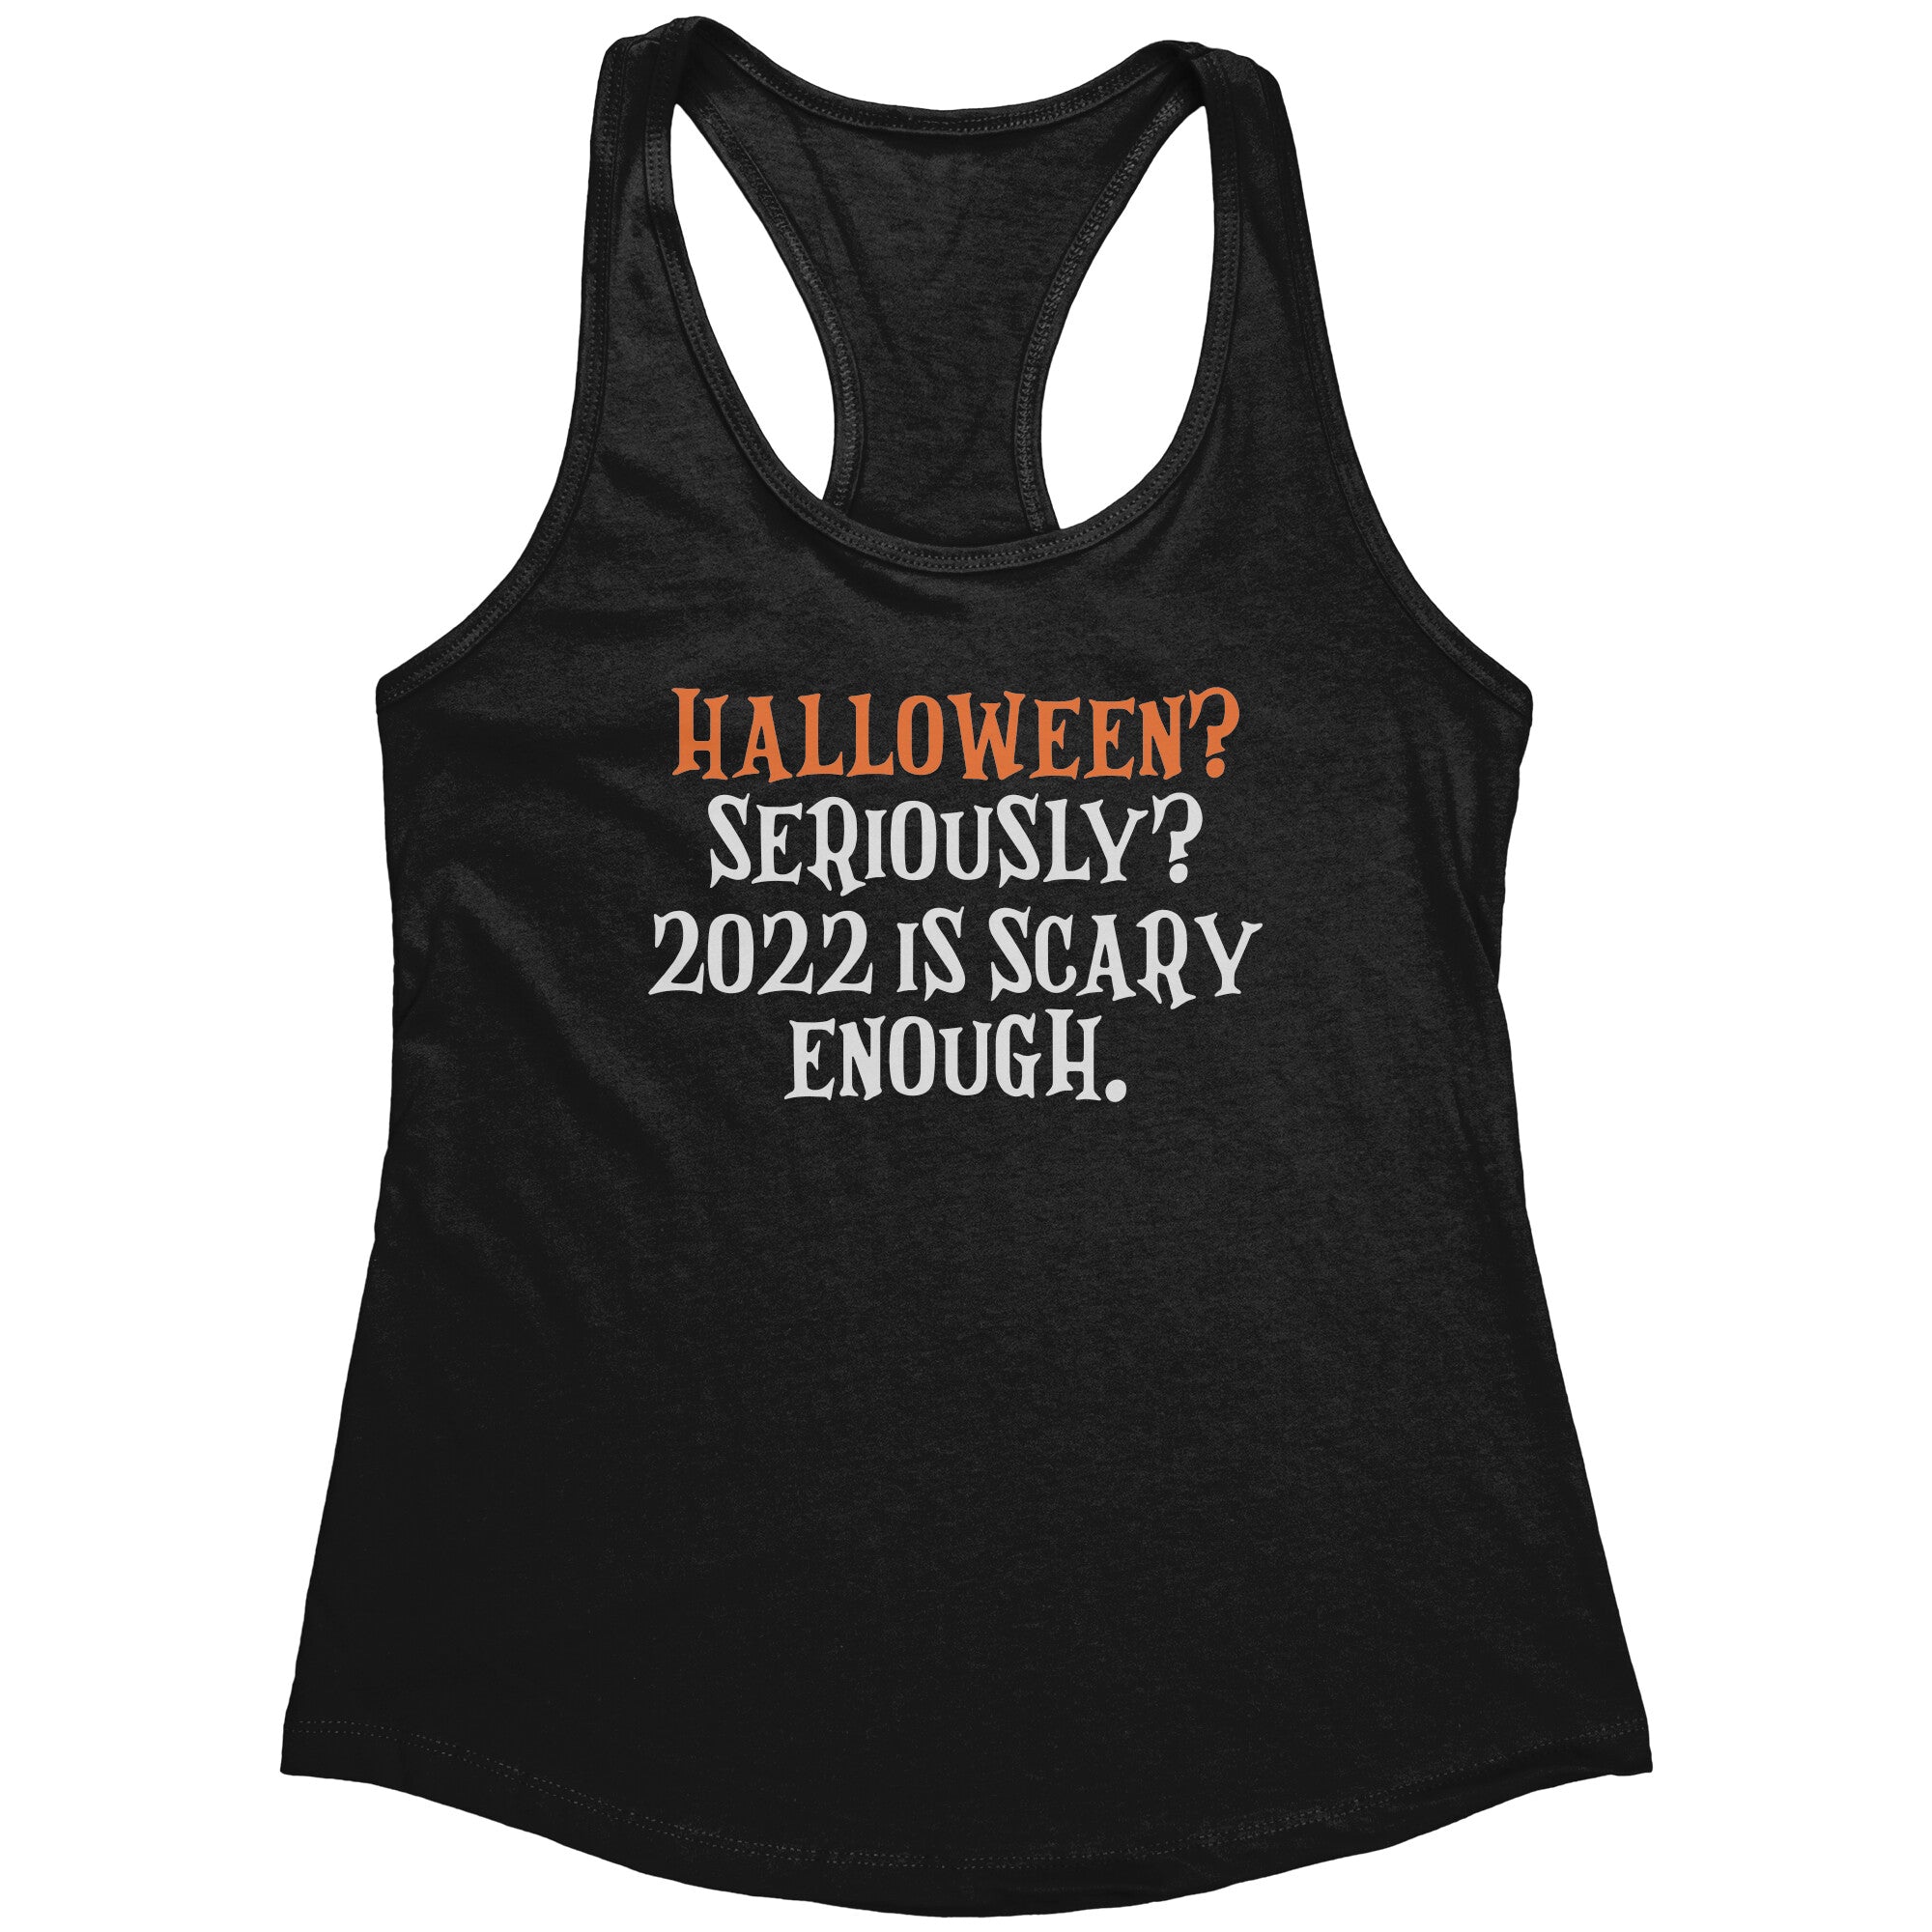 Halloween? Seriously? 2022 Is Scary Enough. (Ladies) -Apparel | Drunk America 